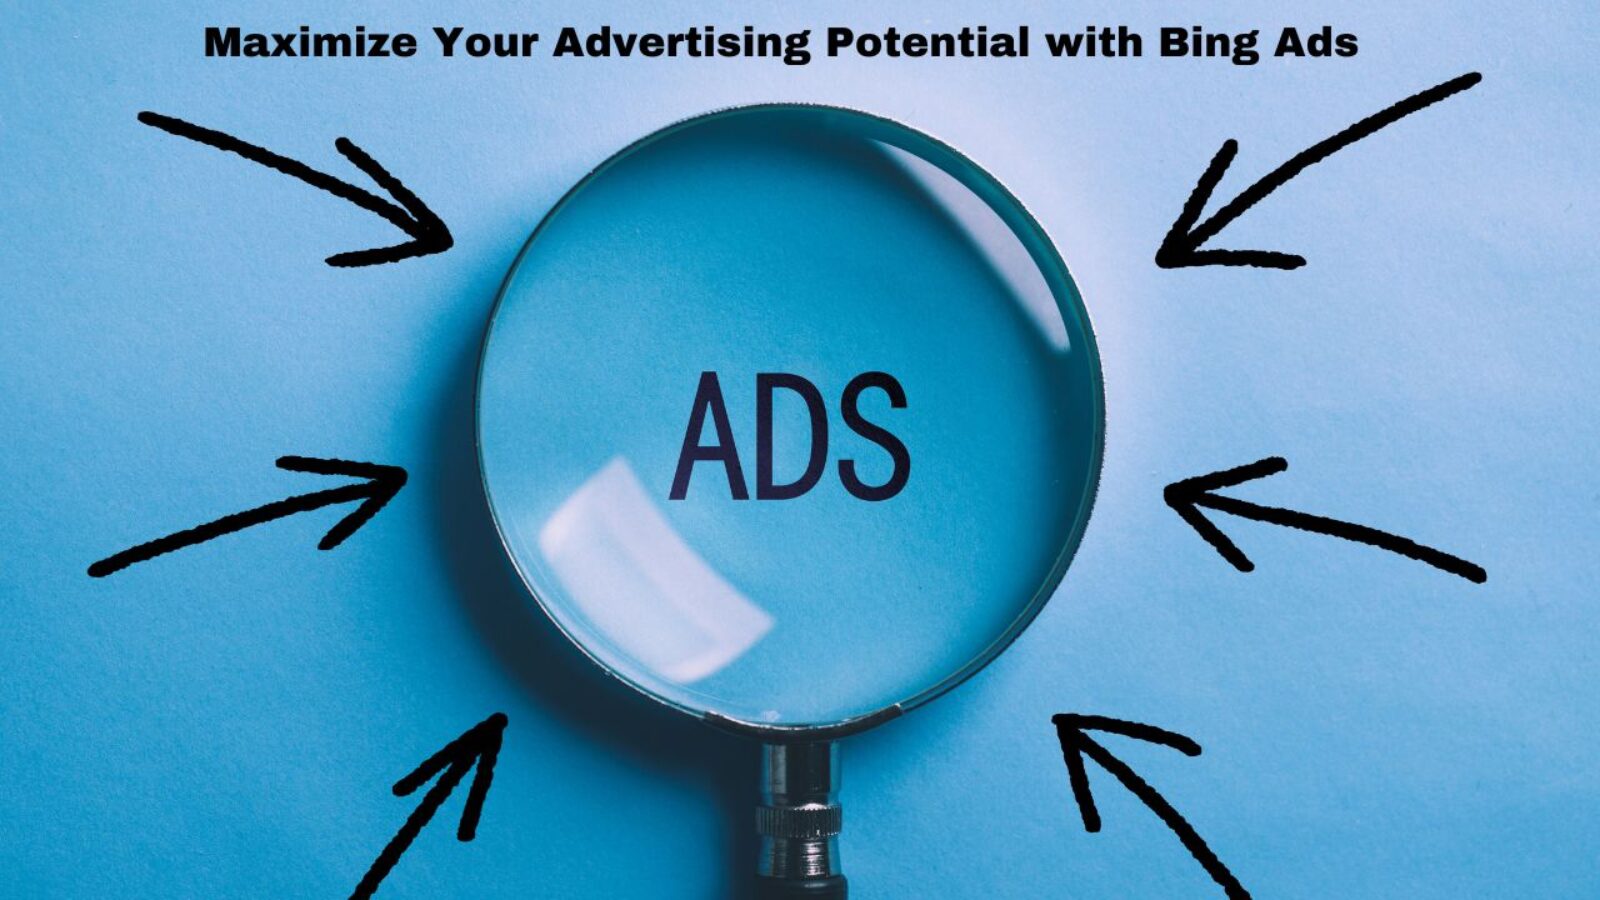 Maximize Your Advertising Potential with Bing Ads